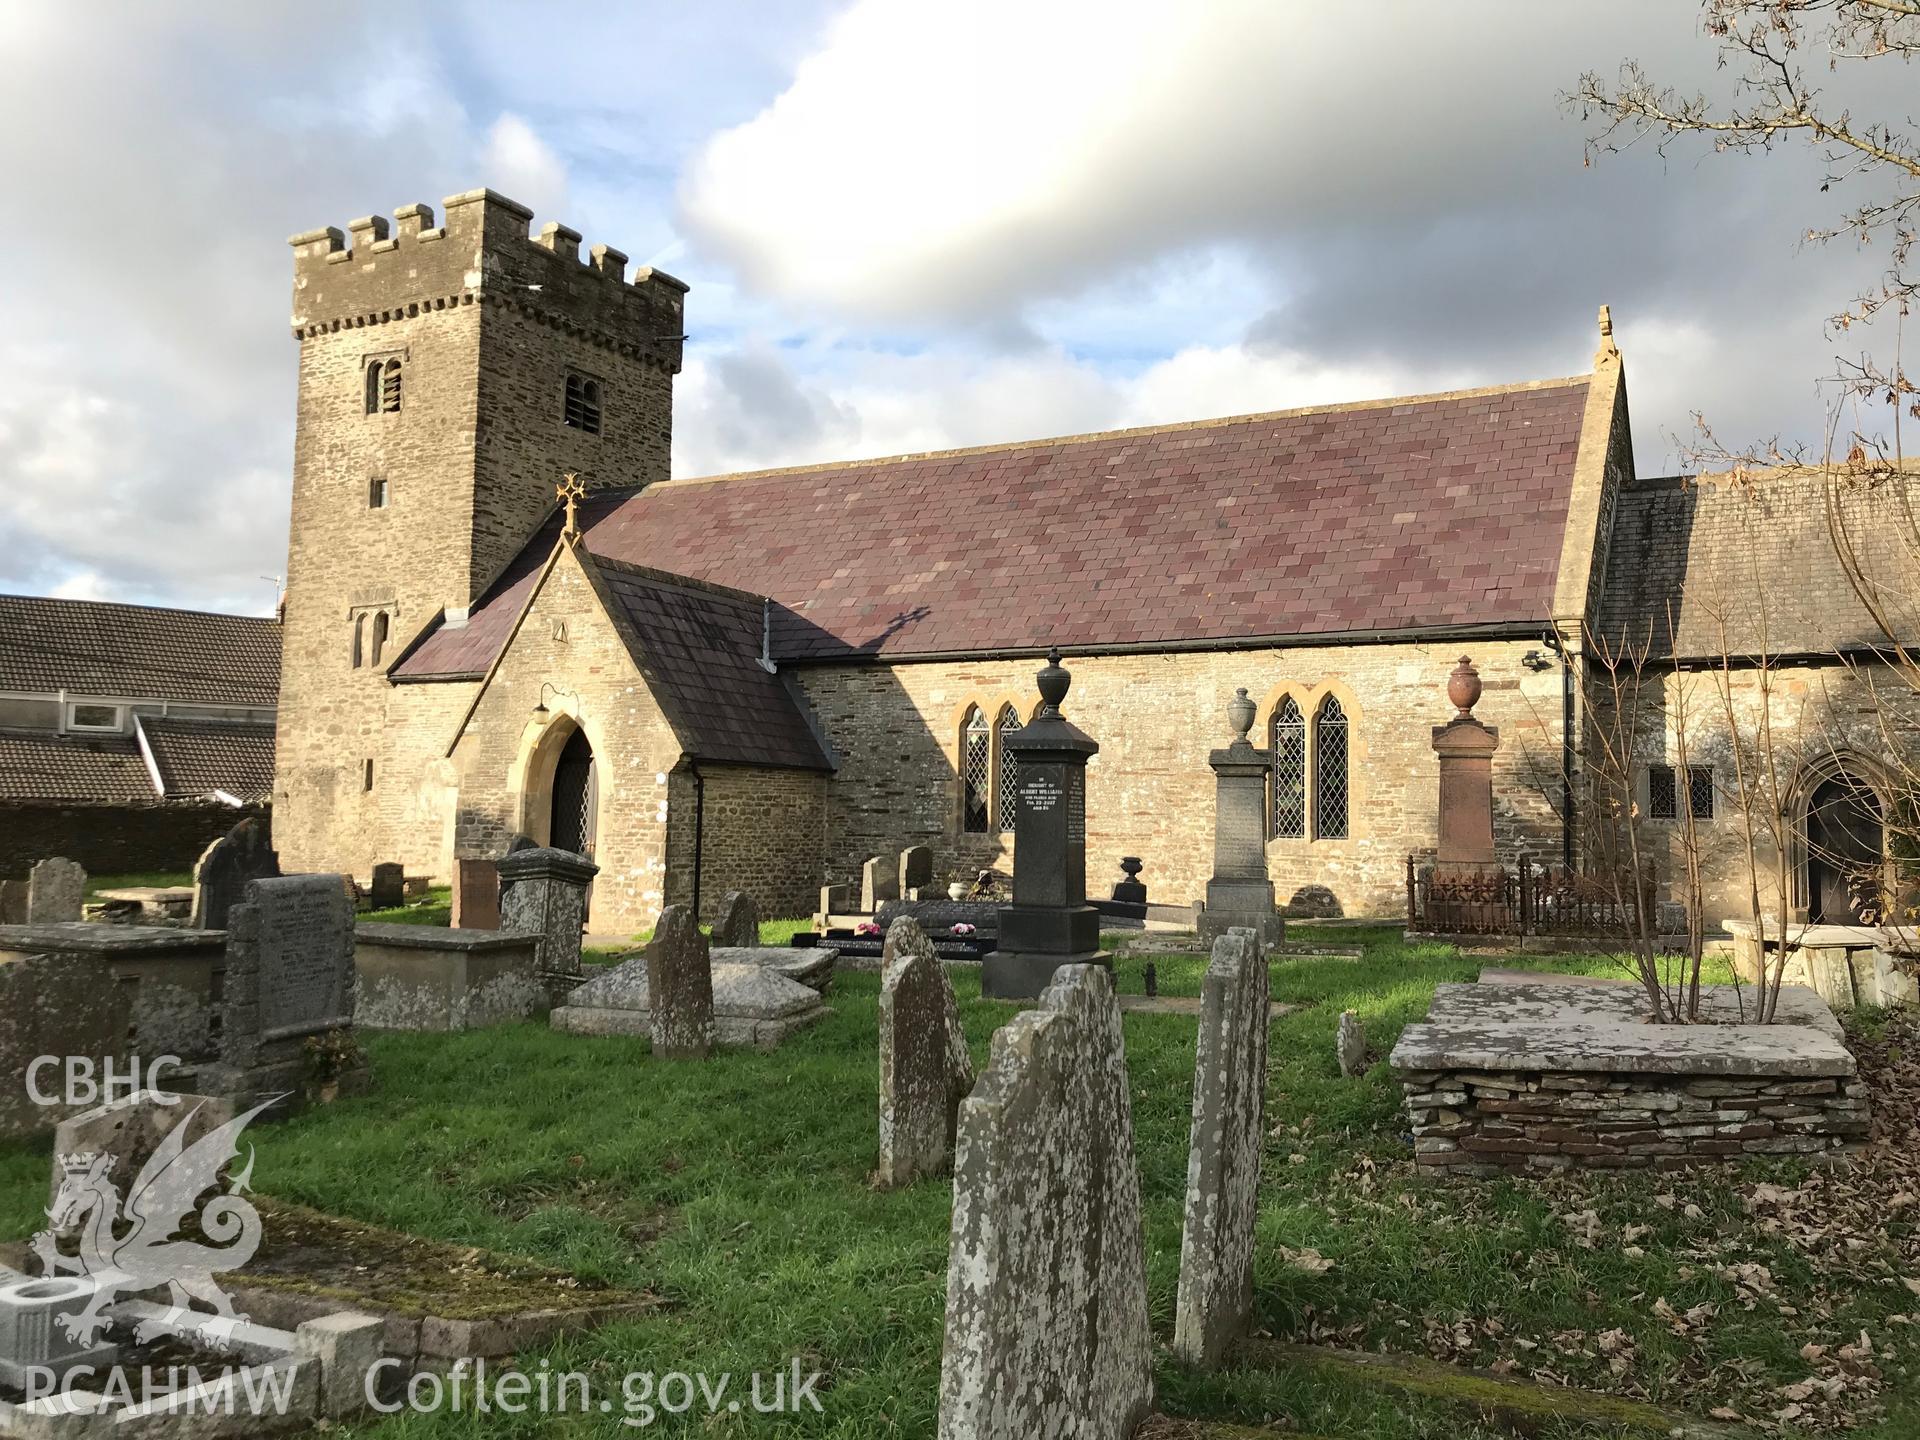 Exterior view of St. Tyfodwg's church and it's graveyard, Llandyfodwg. Colour photograph taken by Paul R. Davis on 14th November 2018.